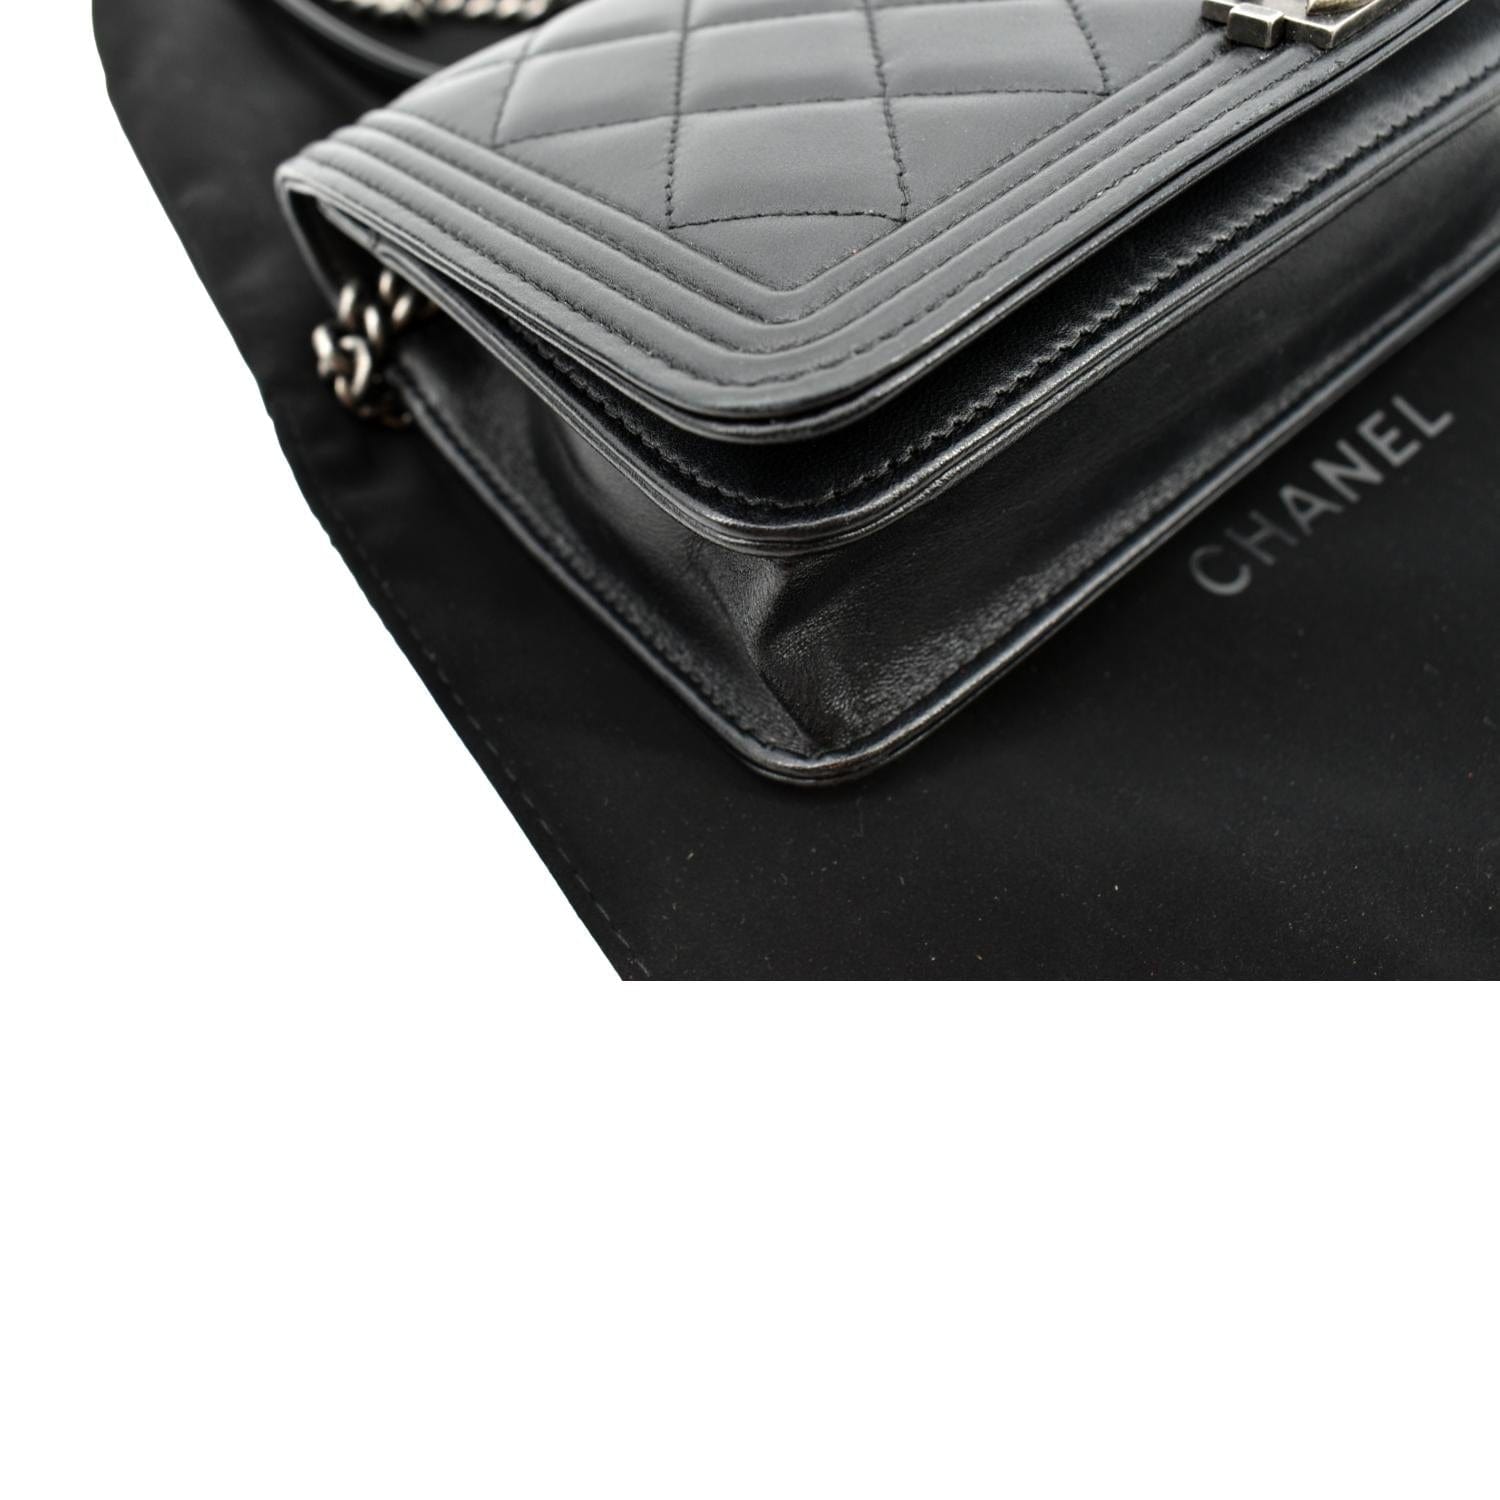 Chanel WOC Wallet on Chain in Black Lambskin with Silver Hardware